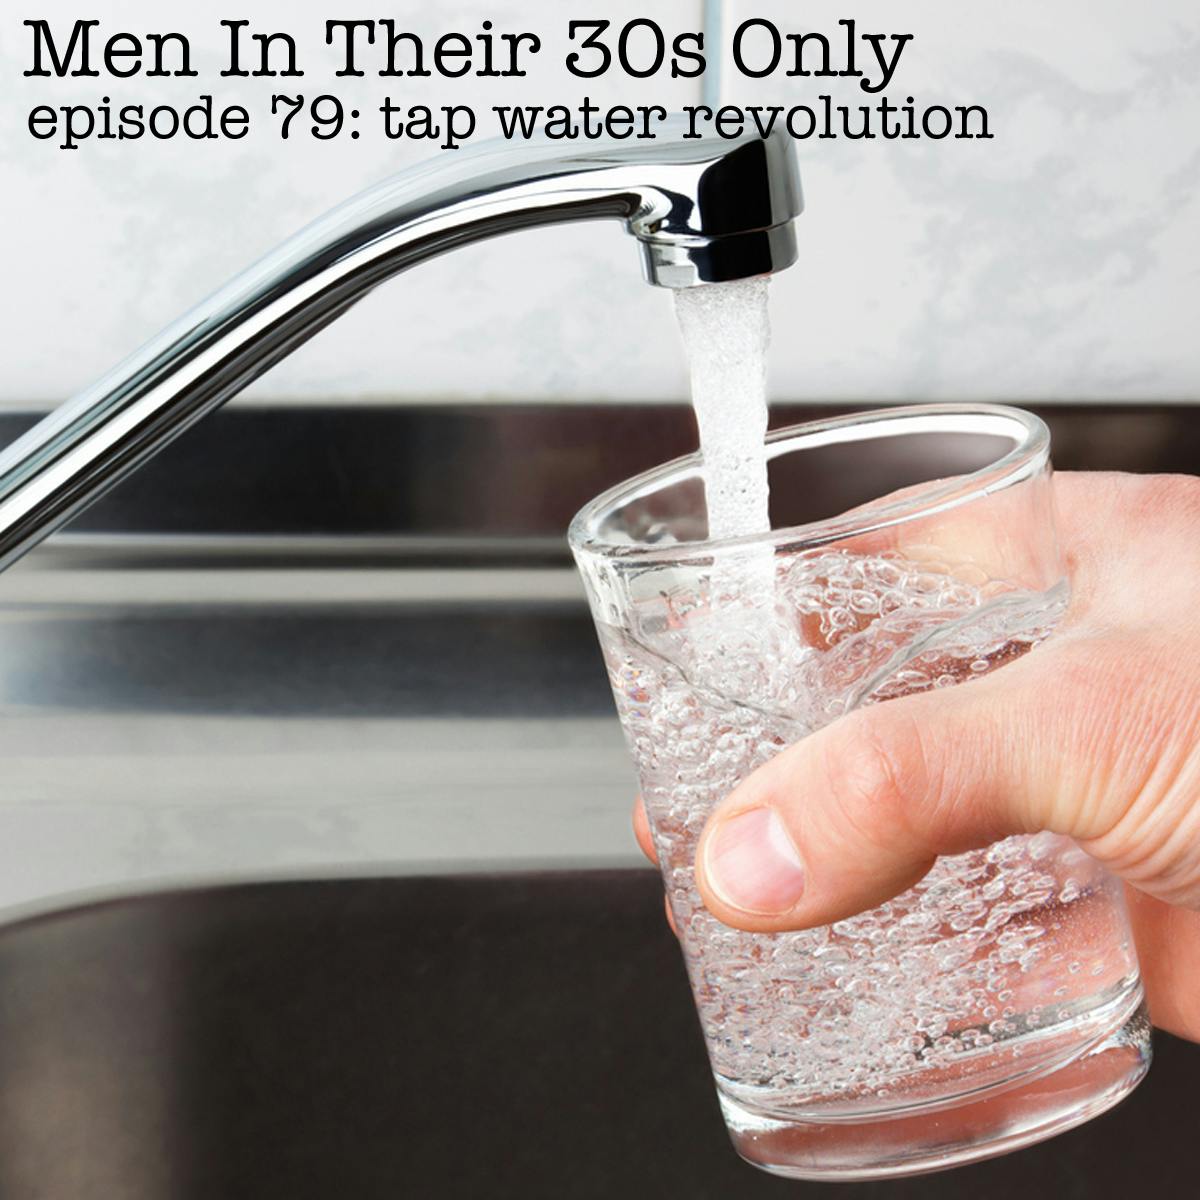 Men In Their 30s Only - Tap Water Revolution